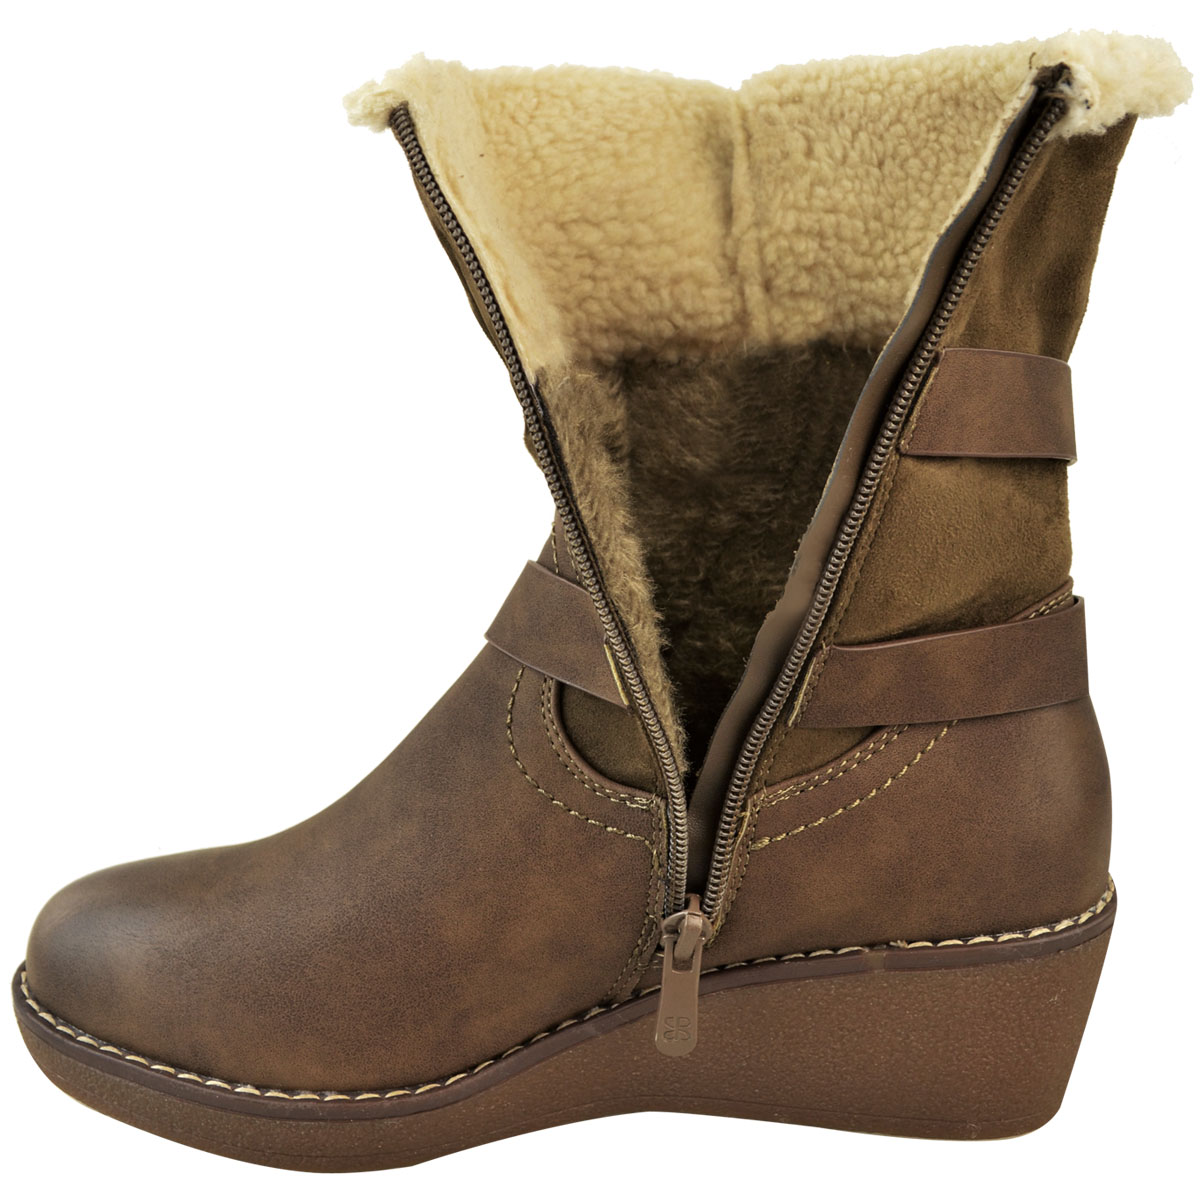 WOMENS WINTER ANKLE BOOTS WARM FUR LINED WALKING COMFOR 